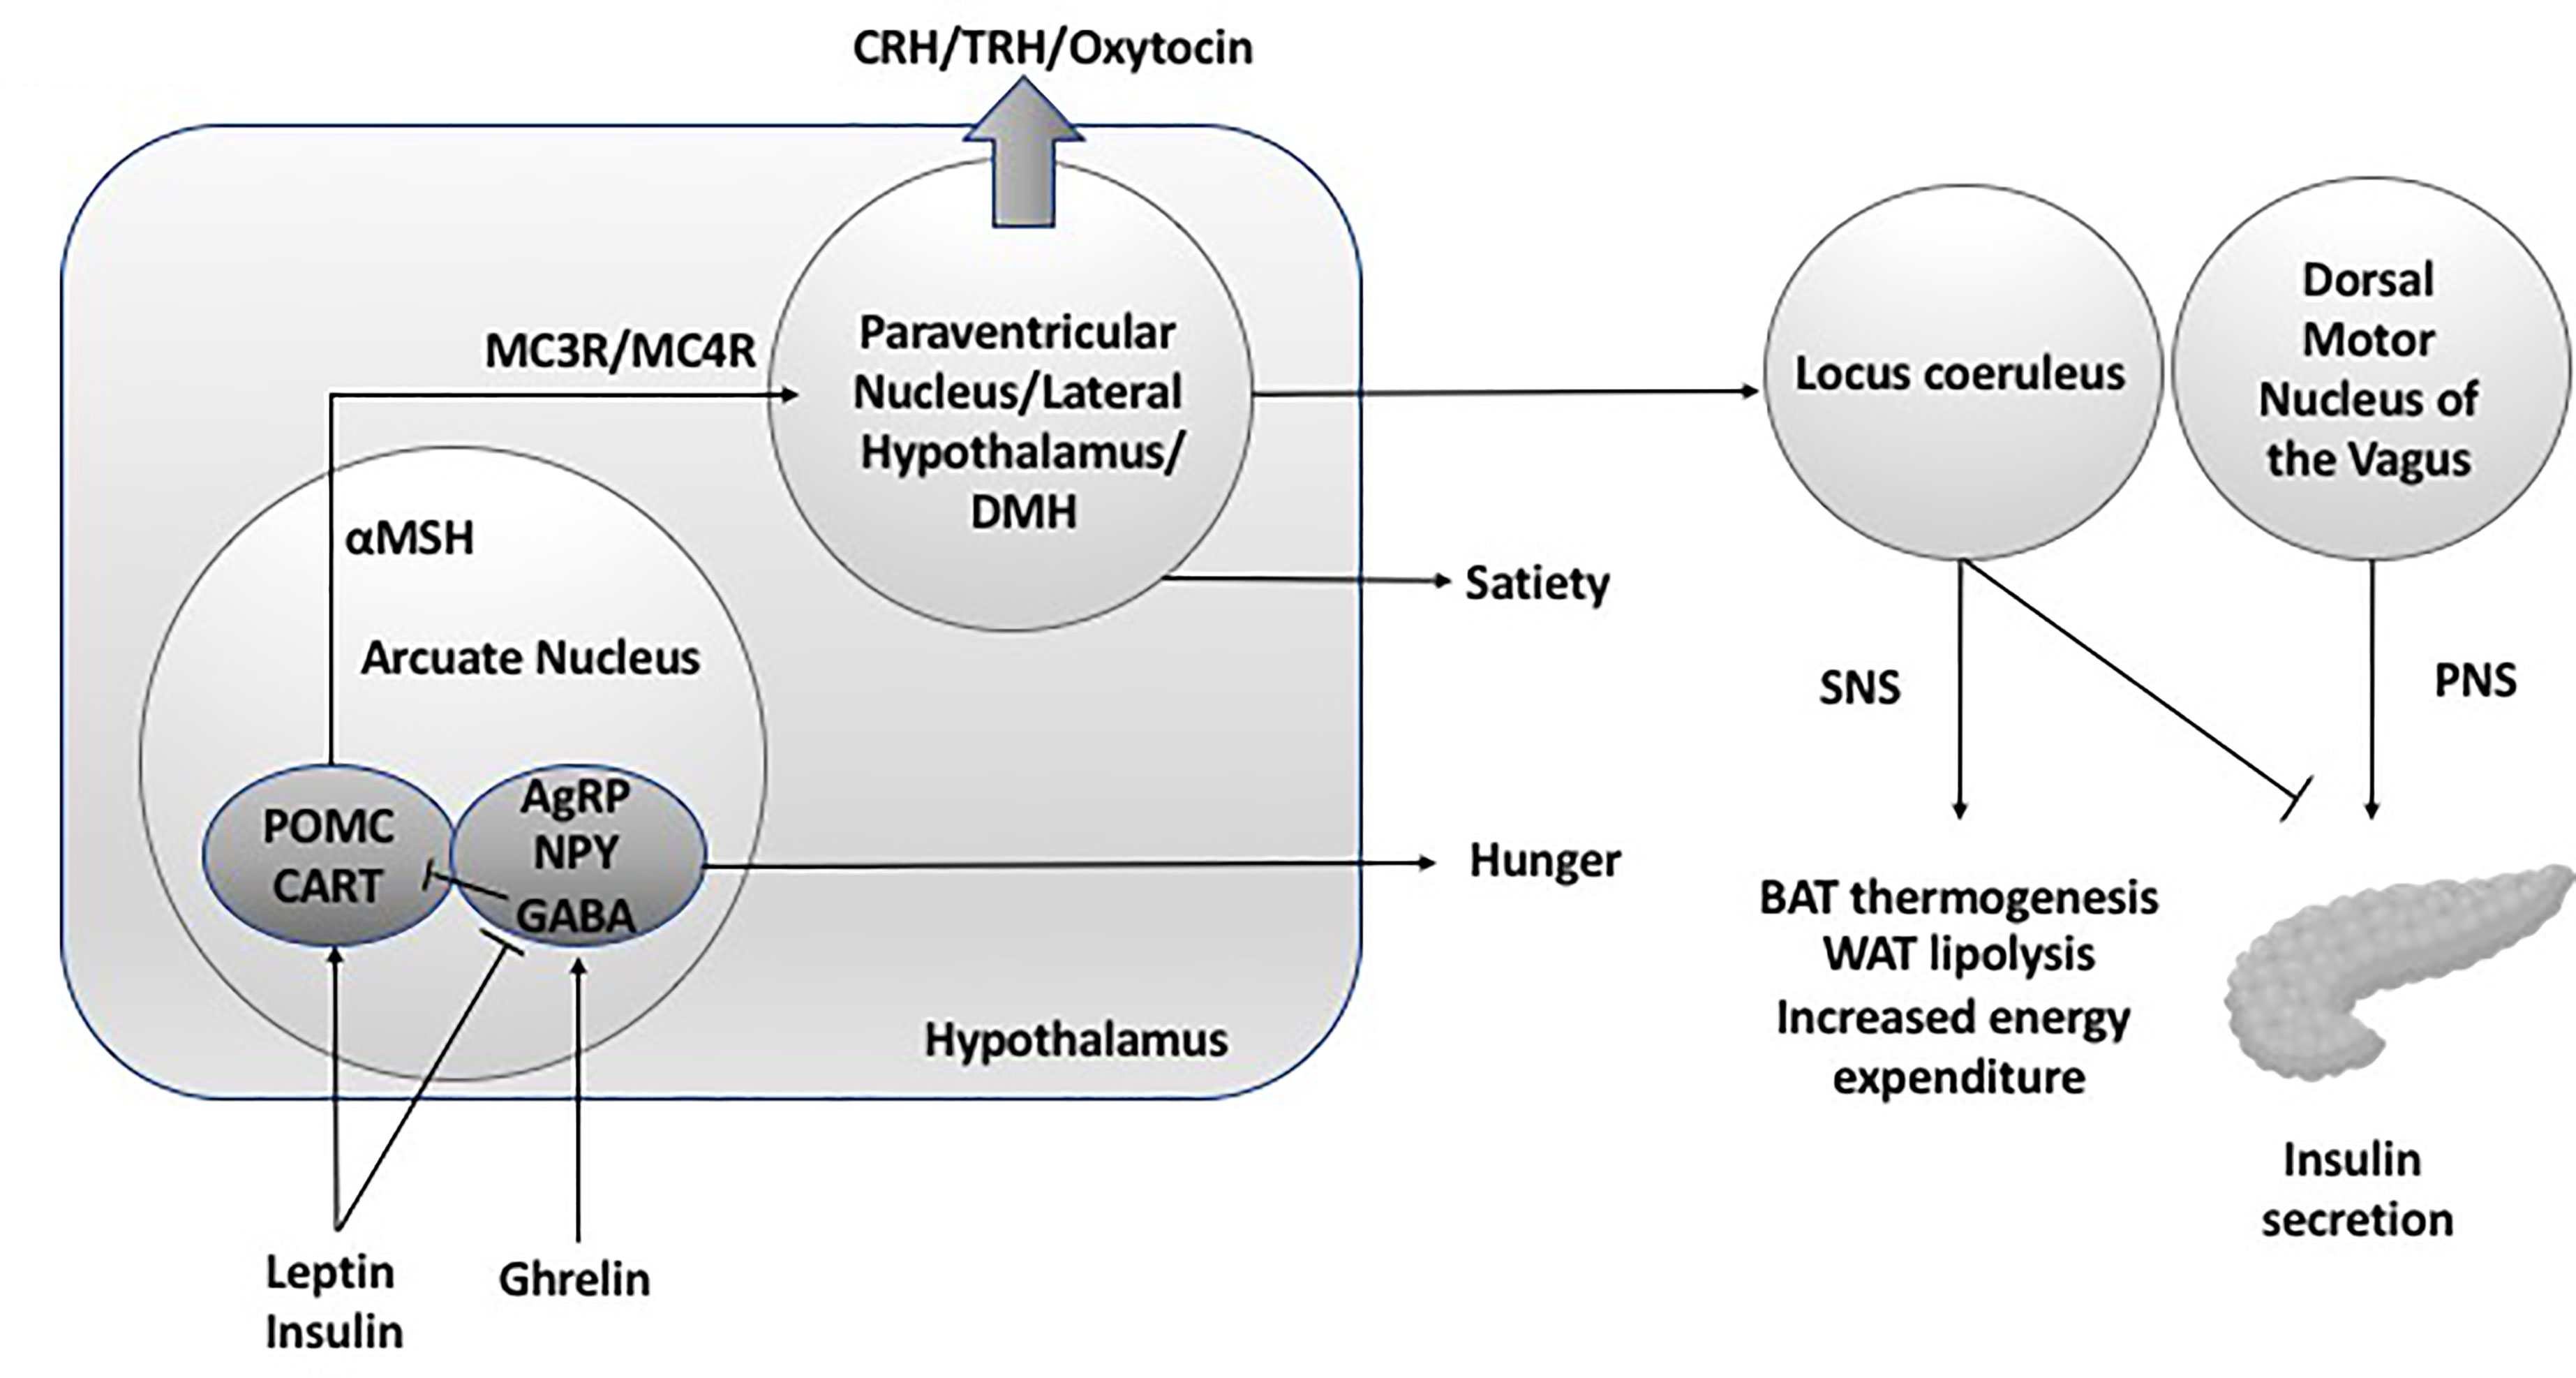 Frontiers | Treatment of Acquired Hypothalamic Obesity: Now and